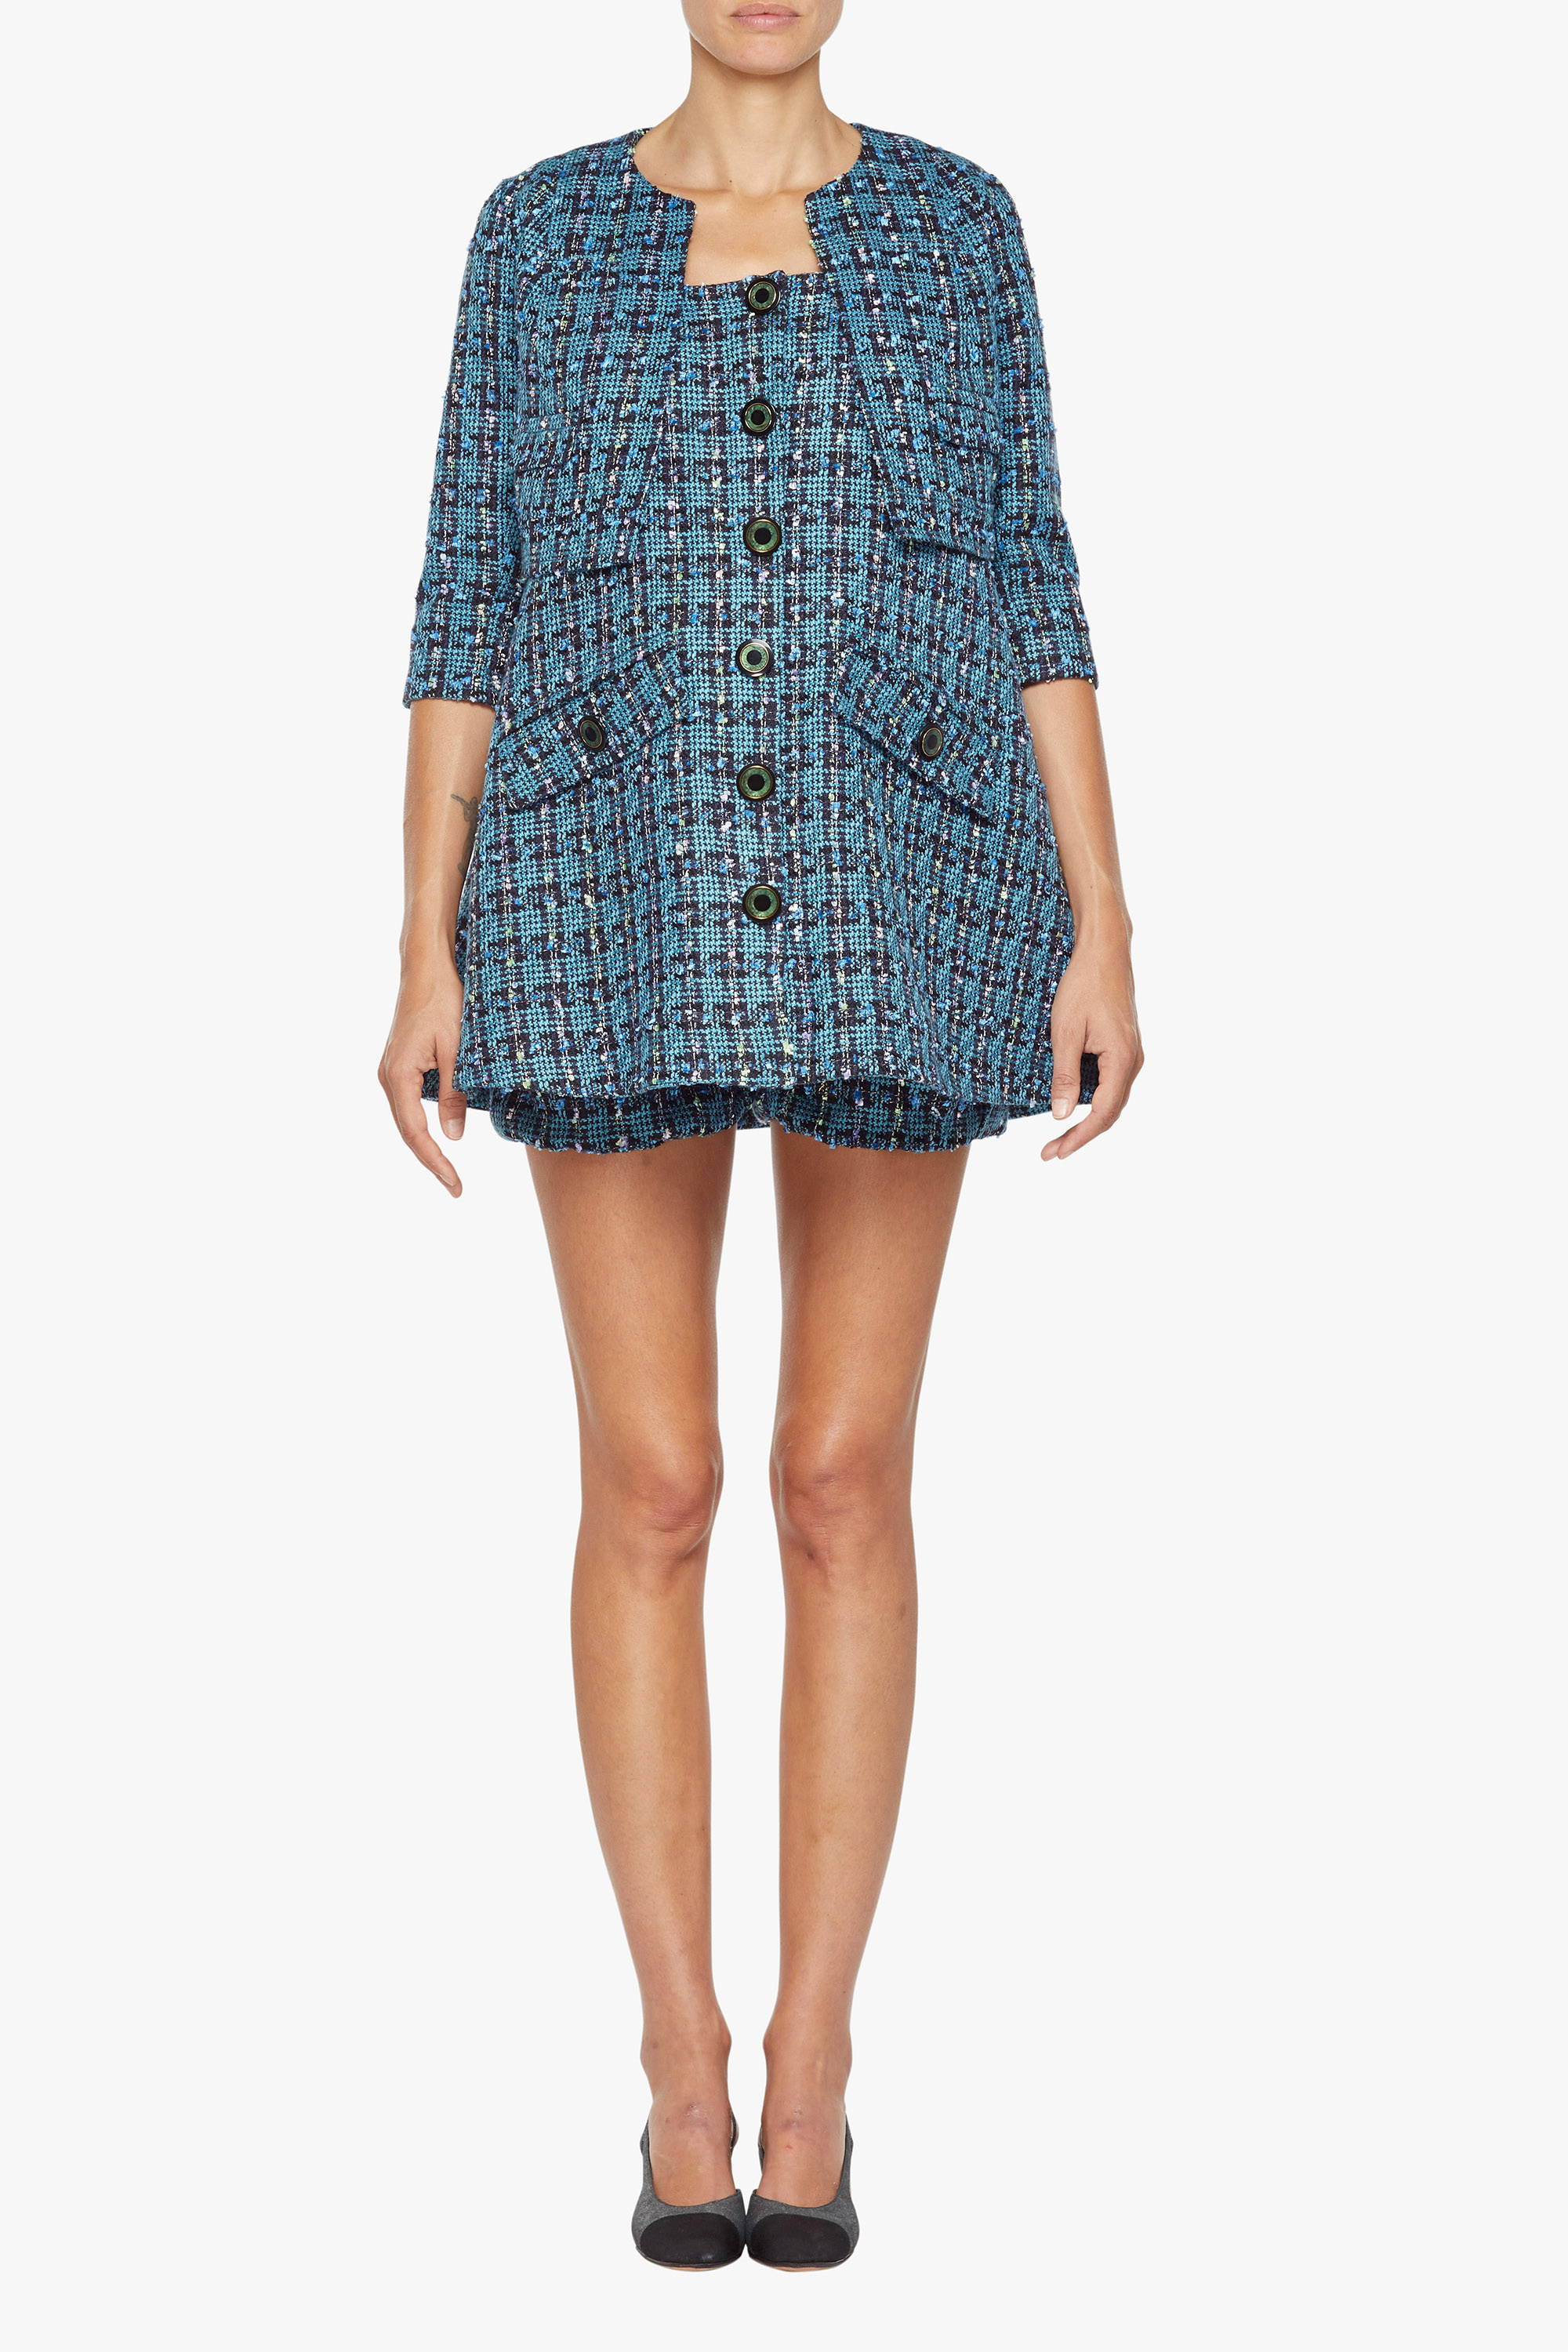 The maternity friendly Beverly dress & jacket in blue purple boucle